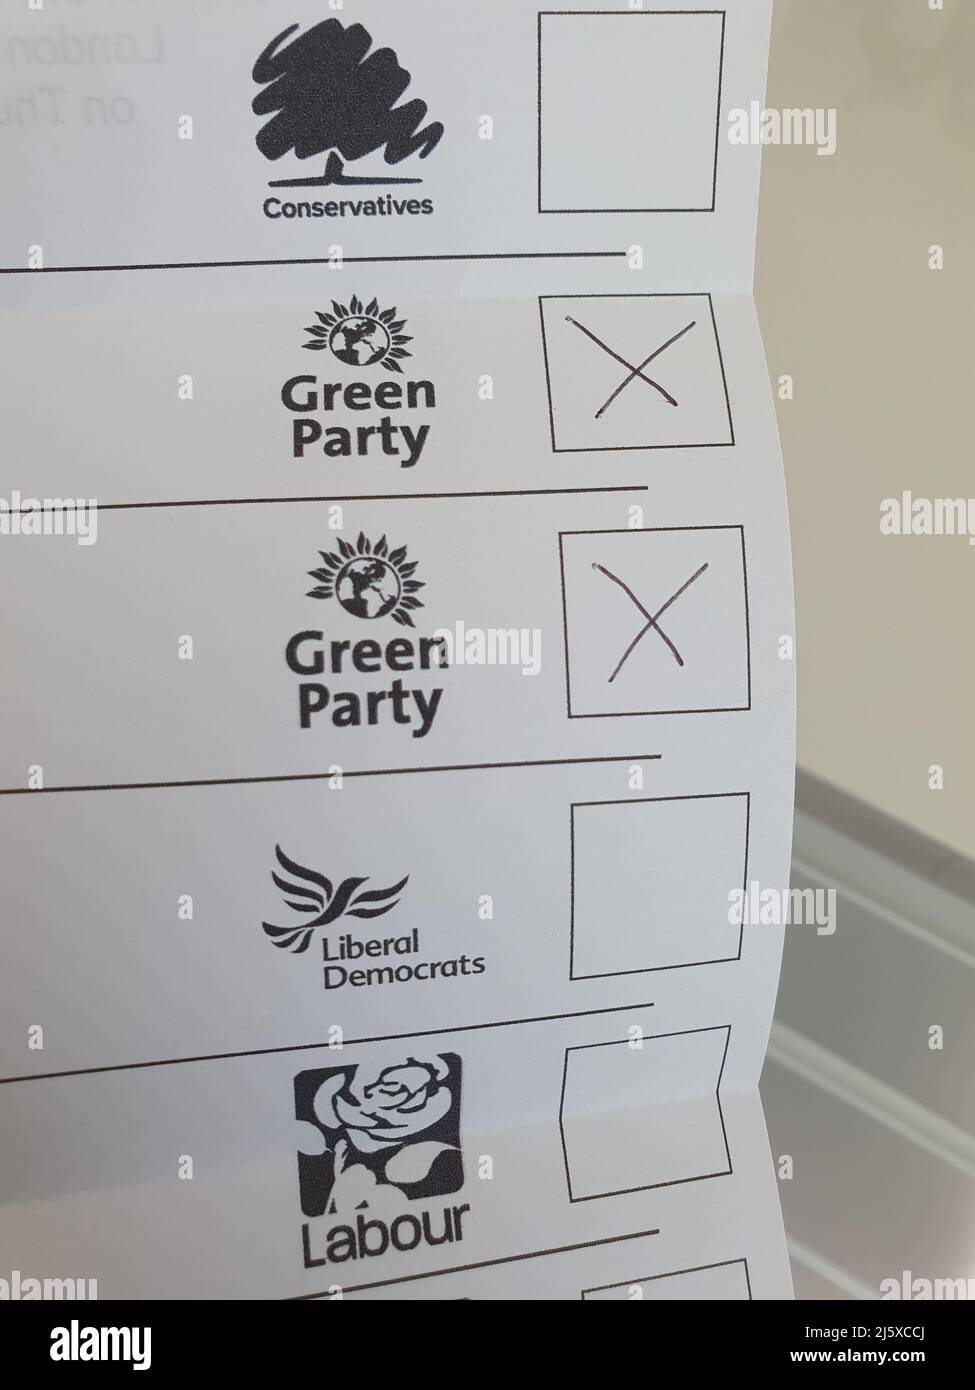 London, UK, 26 April 2022: A local election postal vote paper for the council elections on 5 May is ready to be sent with votes for the Green Party. The Green Party often poll more strongly at local elections than in national elections. Anna Watson/Alamy Live News Stock Photo